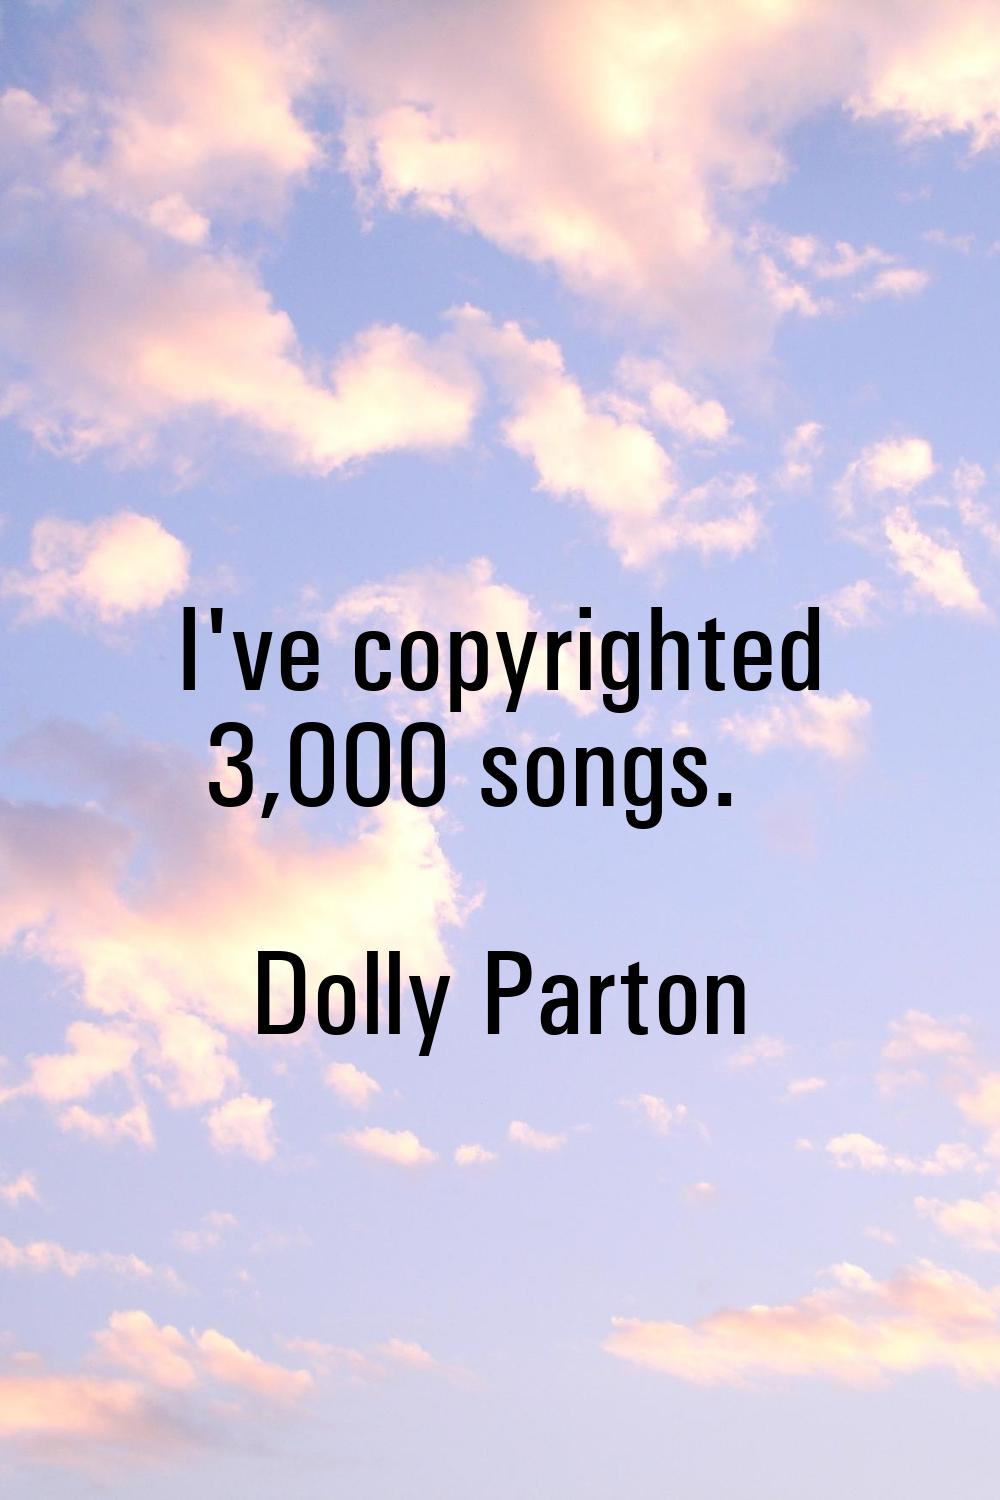 I've copyrighted 3,000 songs.